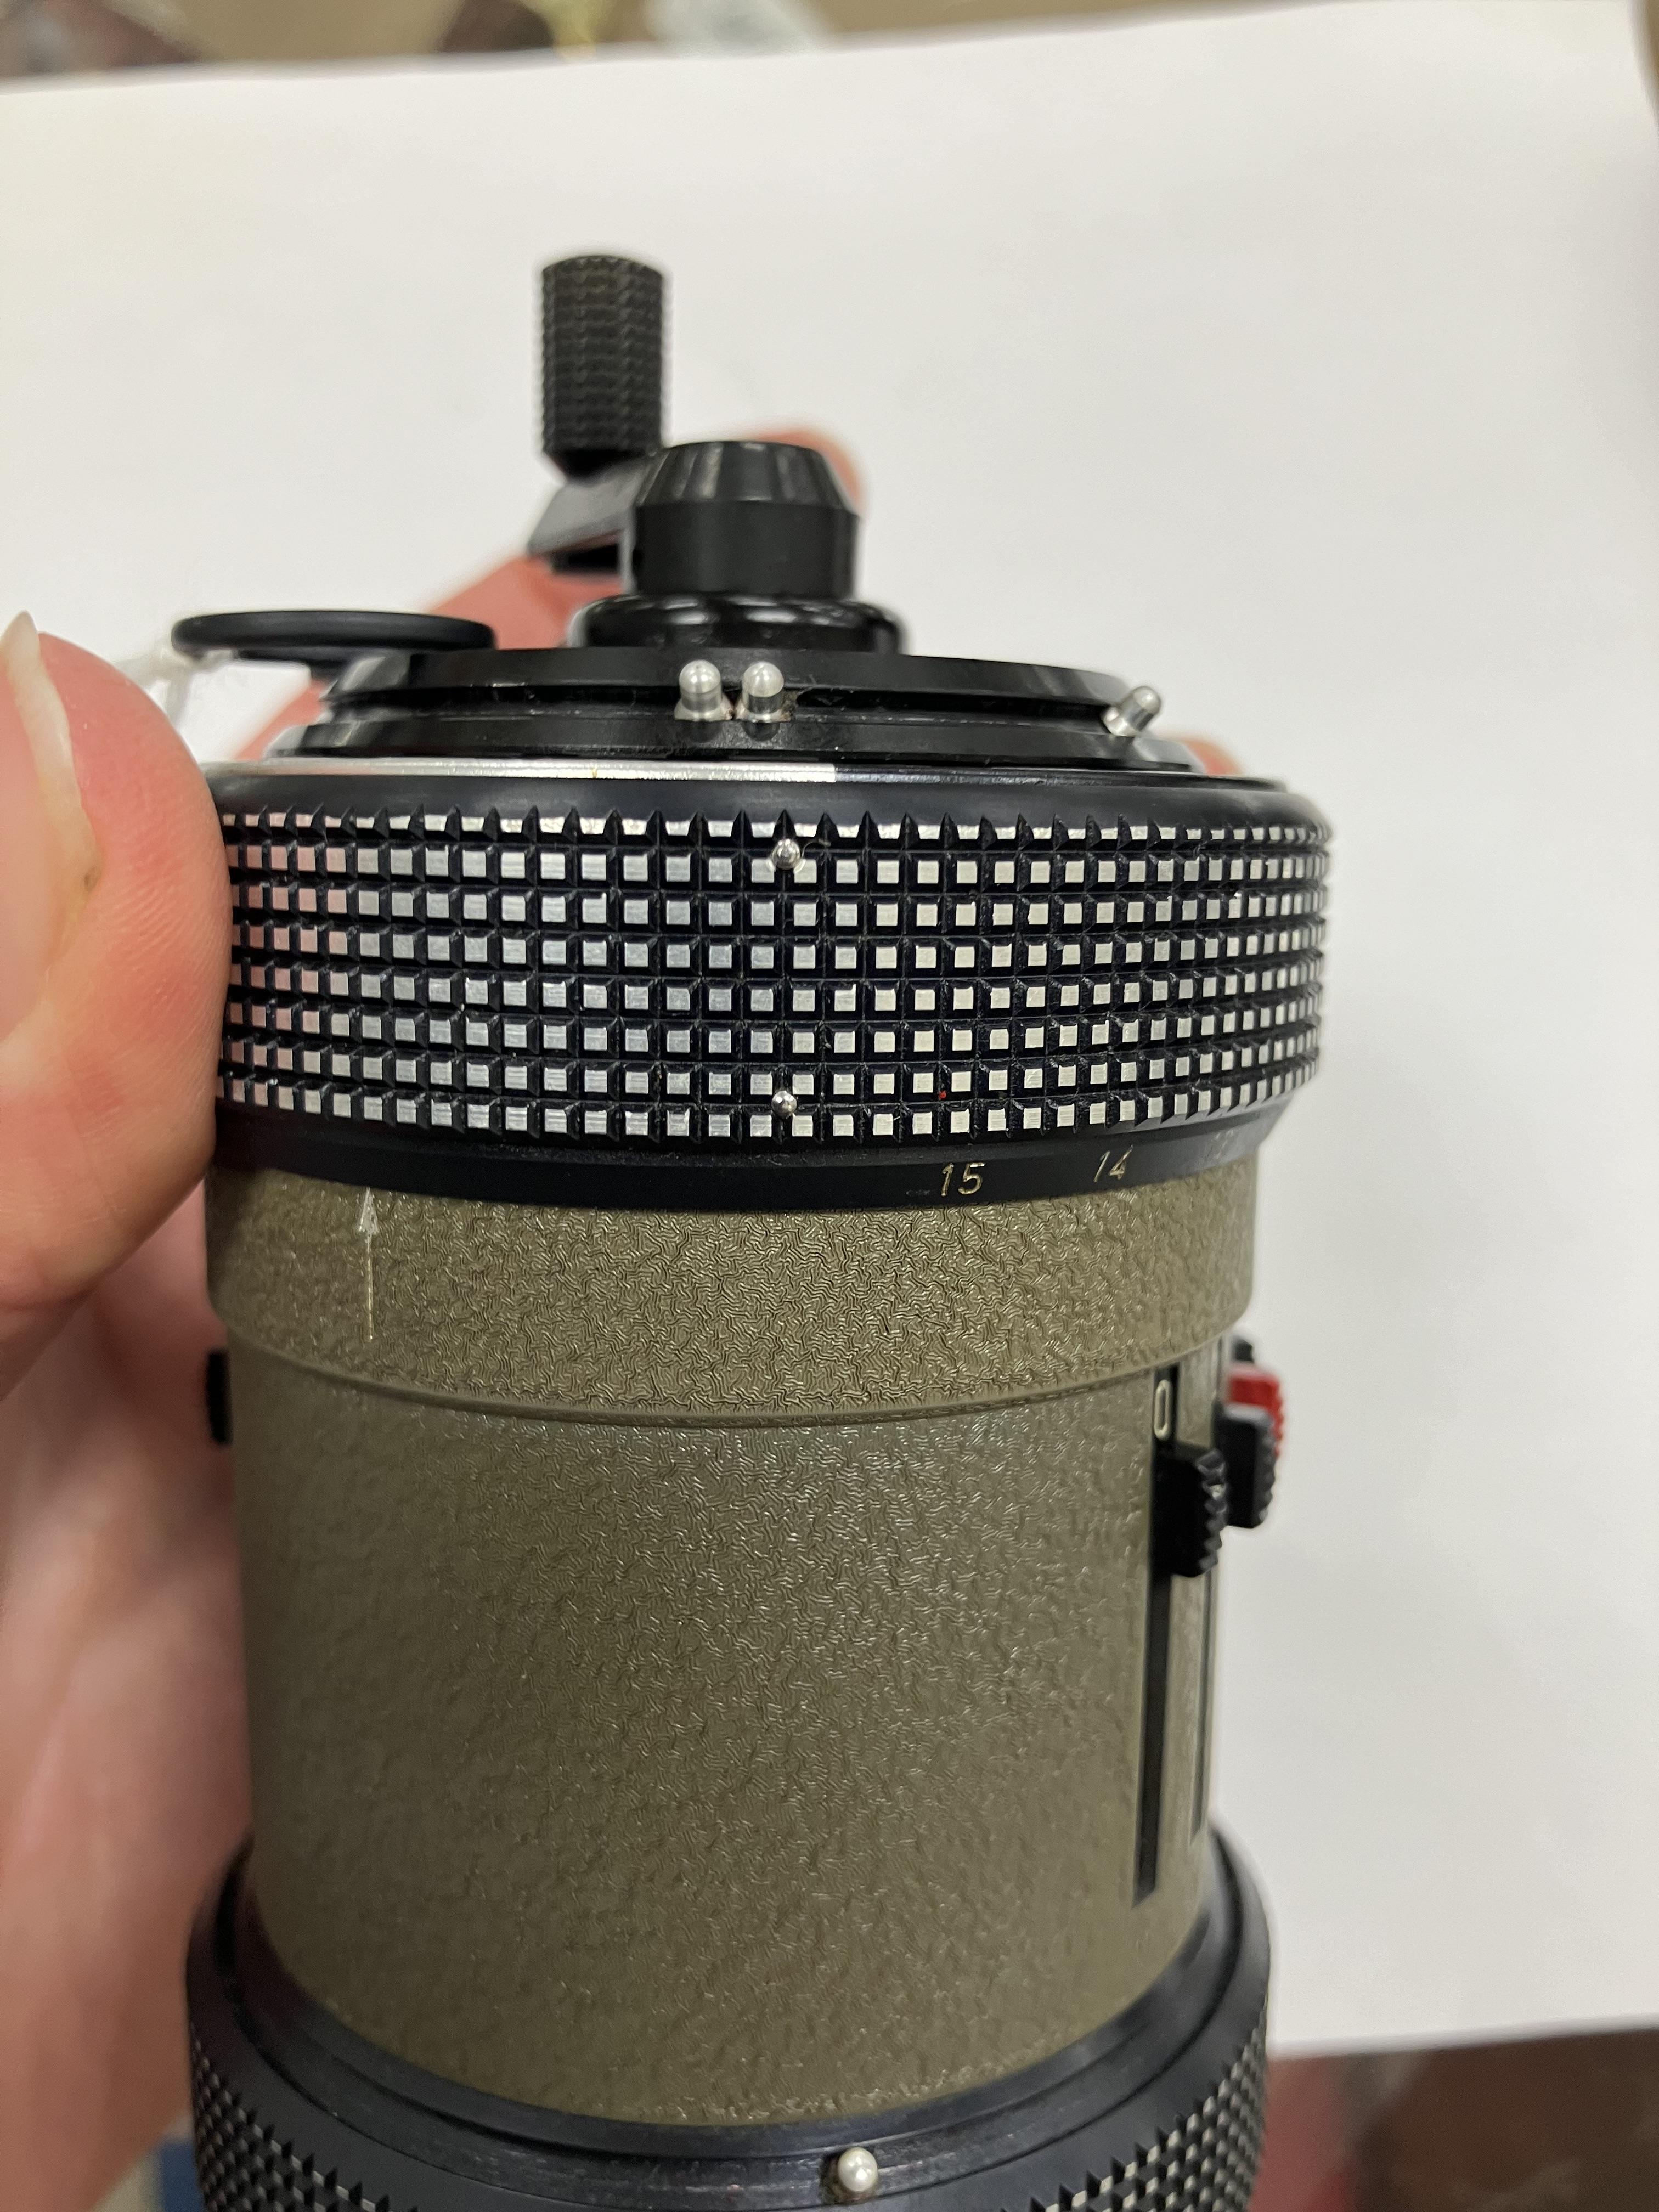 A Curta type 2 calculator with military green type main body inscribed to base "Type 2 No 523646 - Image 11 of 22